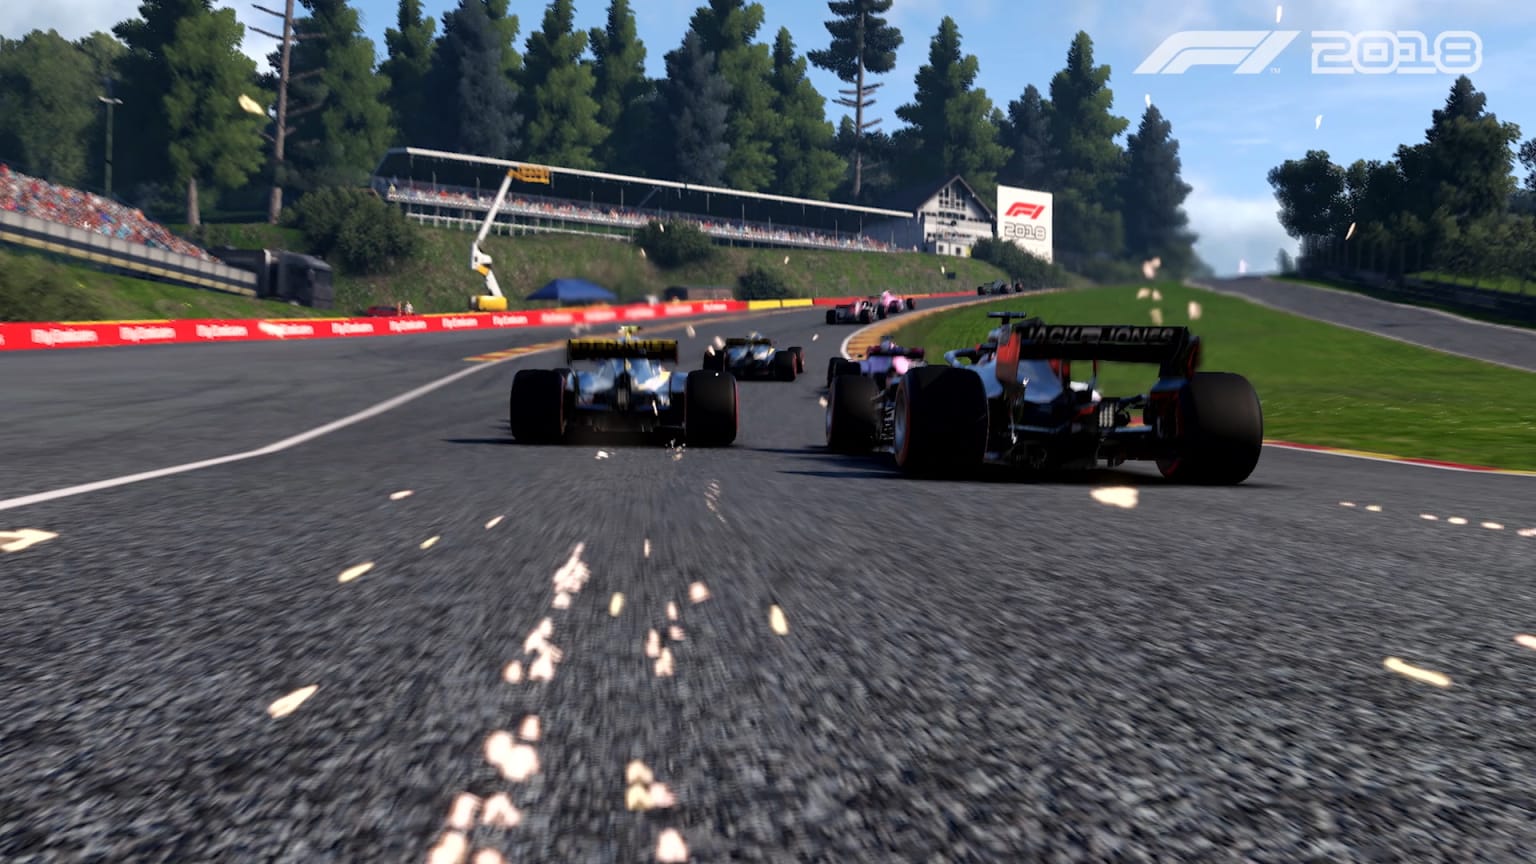 WATCH The latest videogame trailer for F1 2018